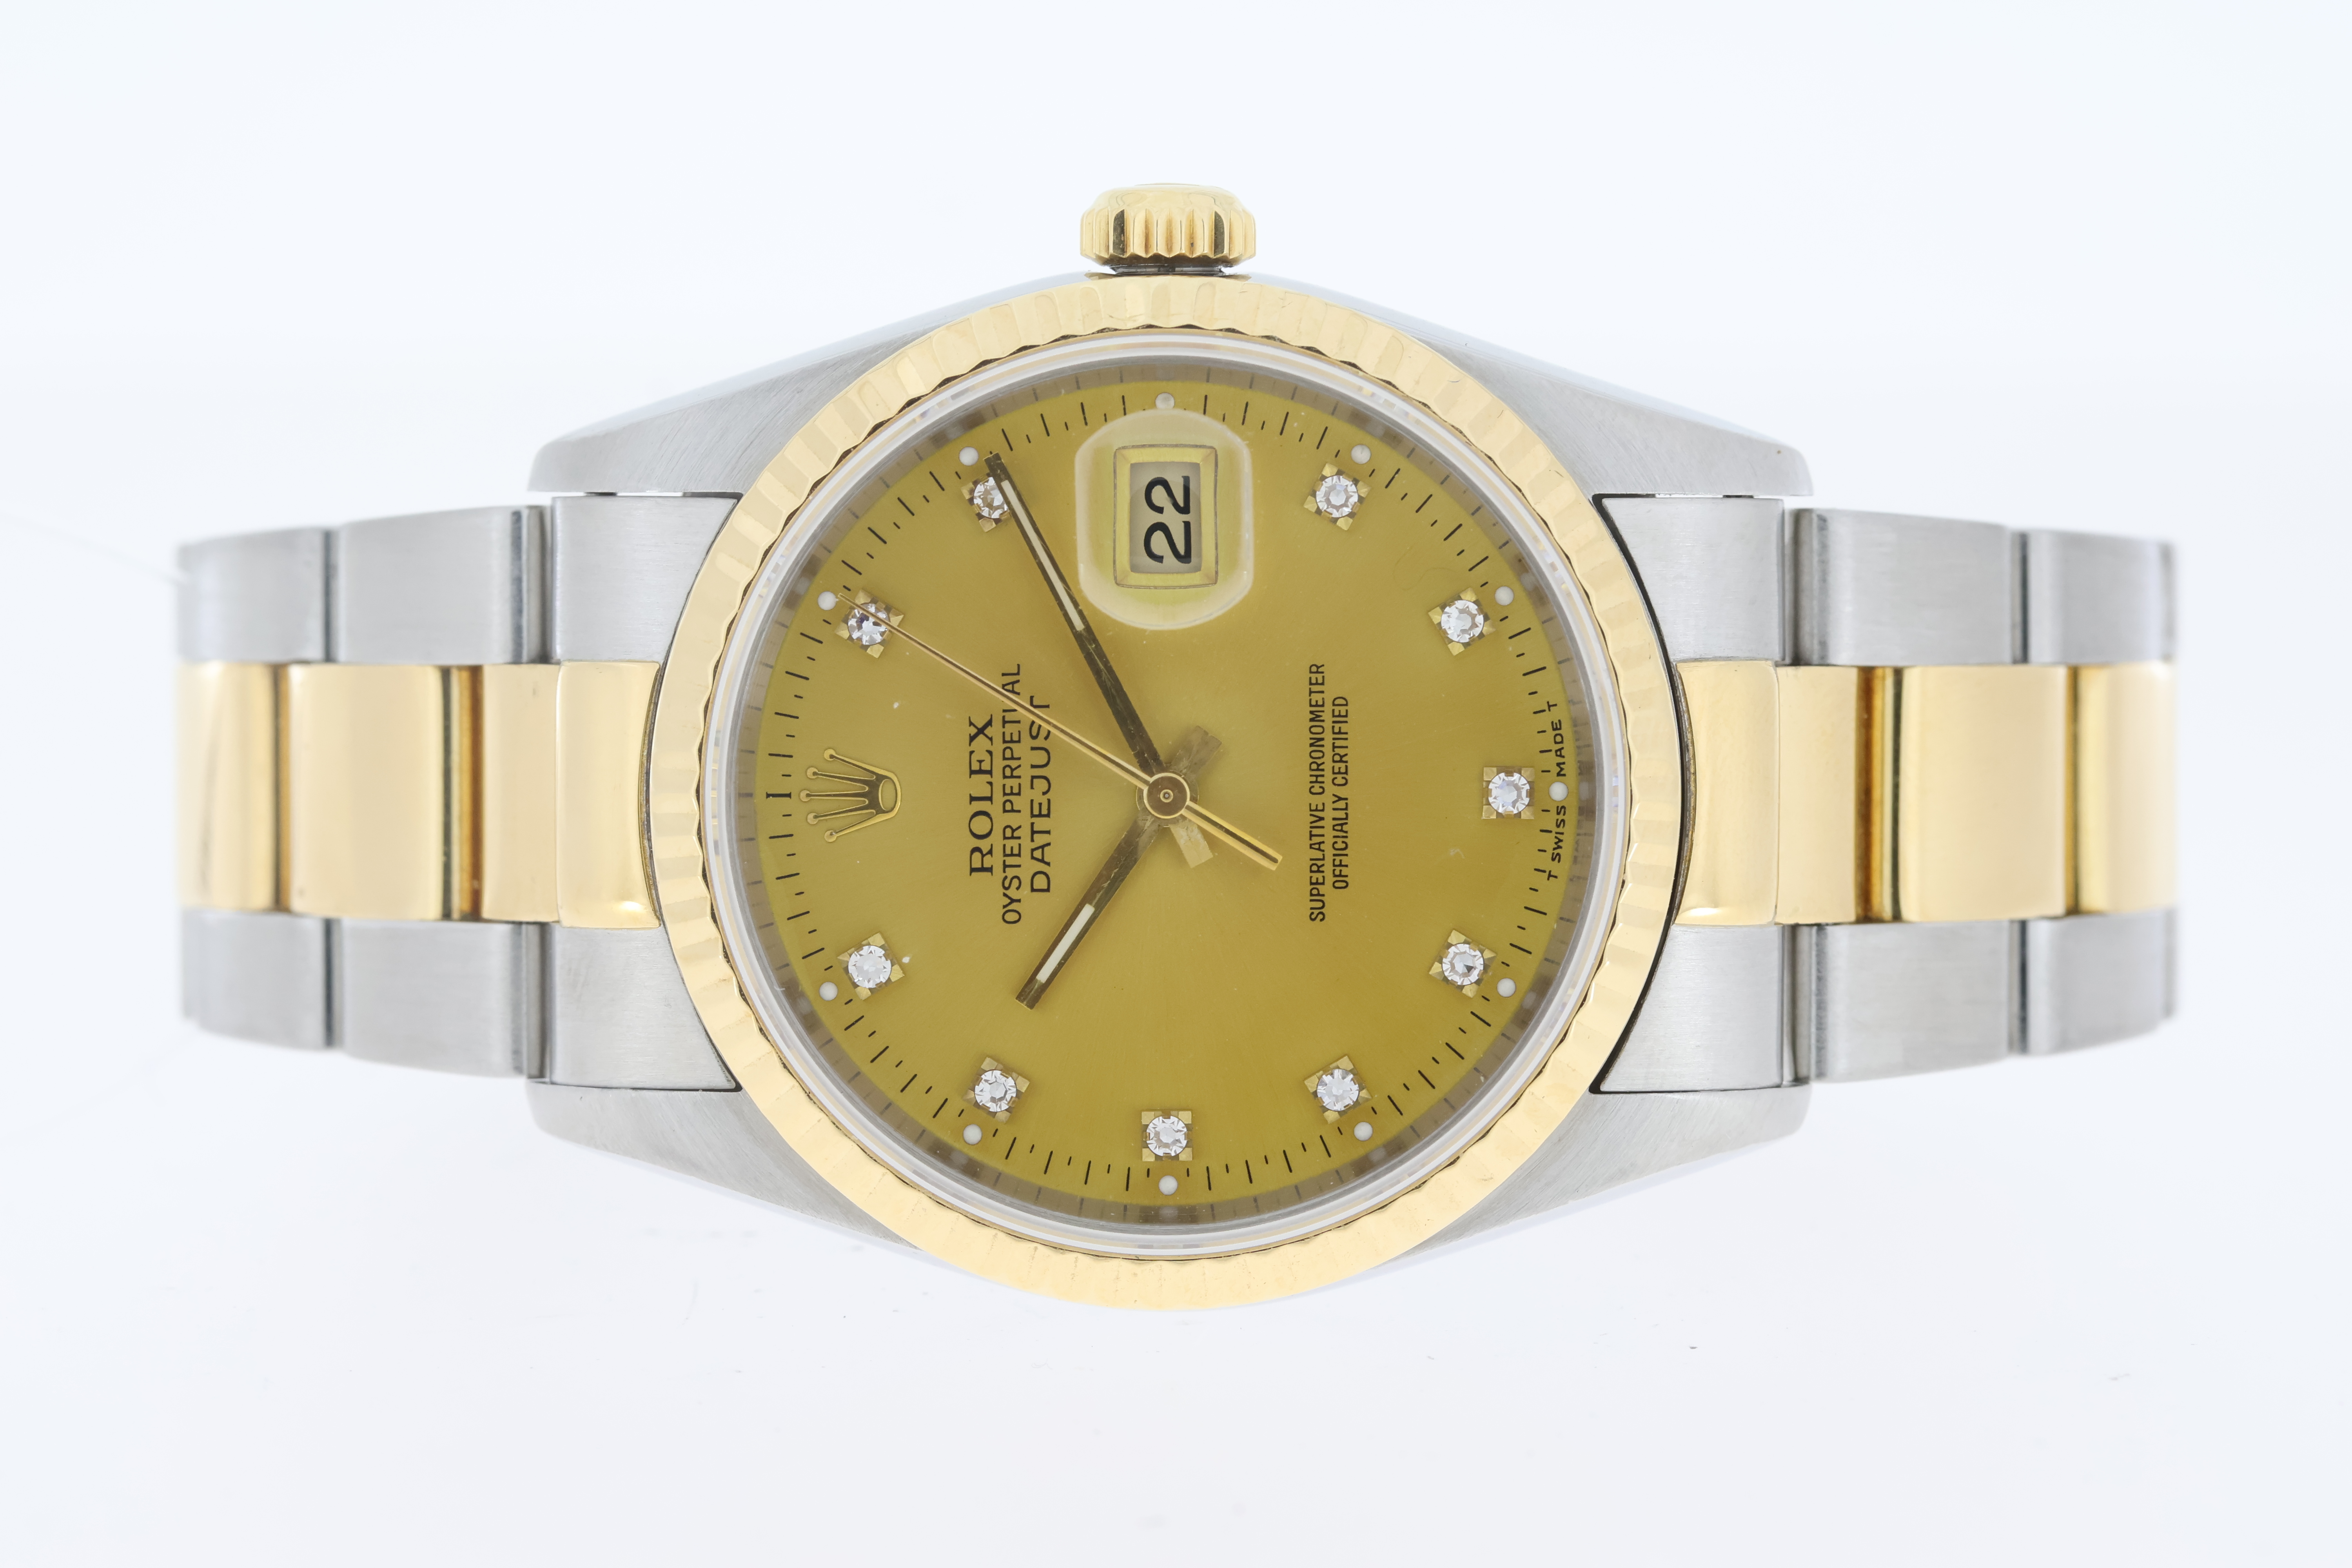 Rolex Datejust 36 Reference 16233 Box and Papers 1999 - Image 2 of 5